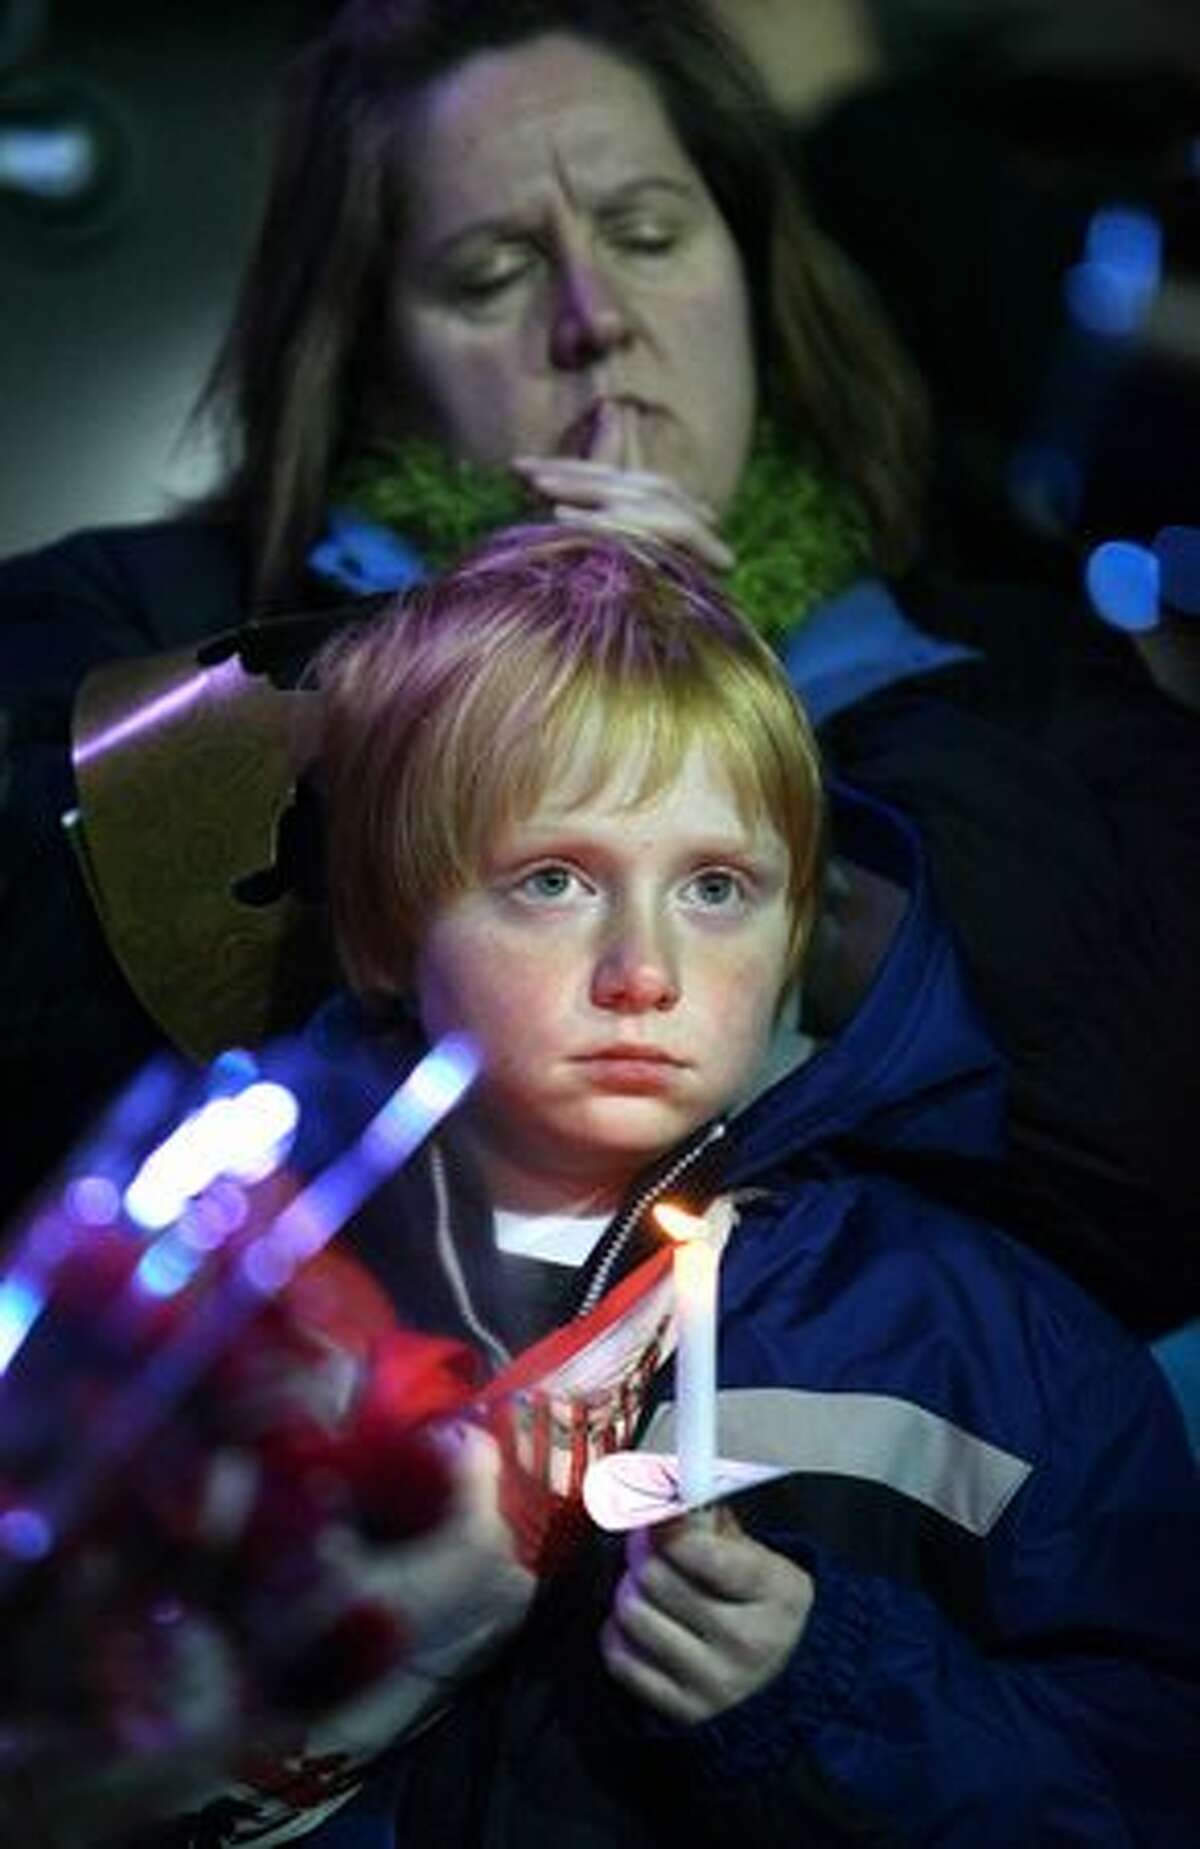 Kelly Groenwold and her son Aaron, of Lakewood, Wash., participate during a candlelight vigil on Wednesday December 2, 2009 at the Lakewood Family YMCA in Lakewood, Wash. Thousands gathered to pay their respects to four Lakewood Police officers who were shot and killed at a coffeepot Sunday morning in Parkwood.